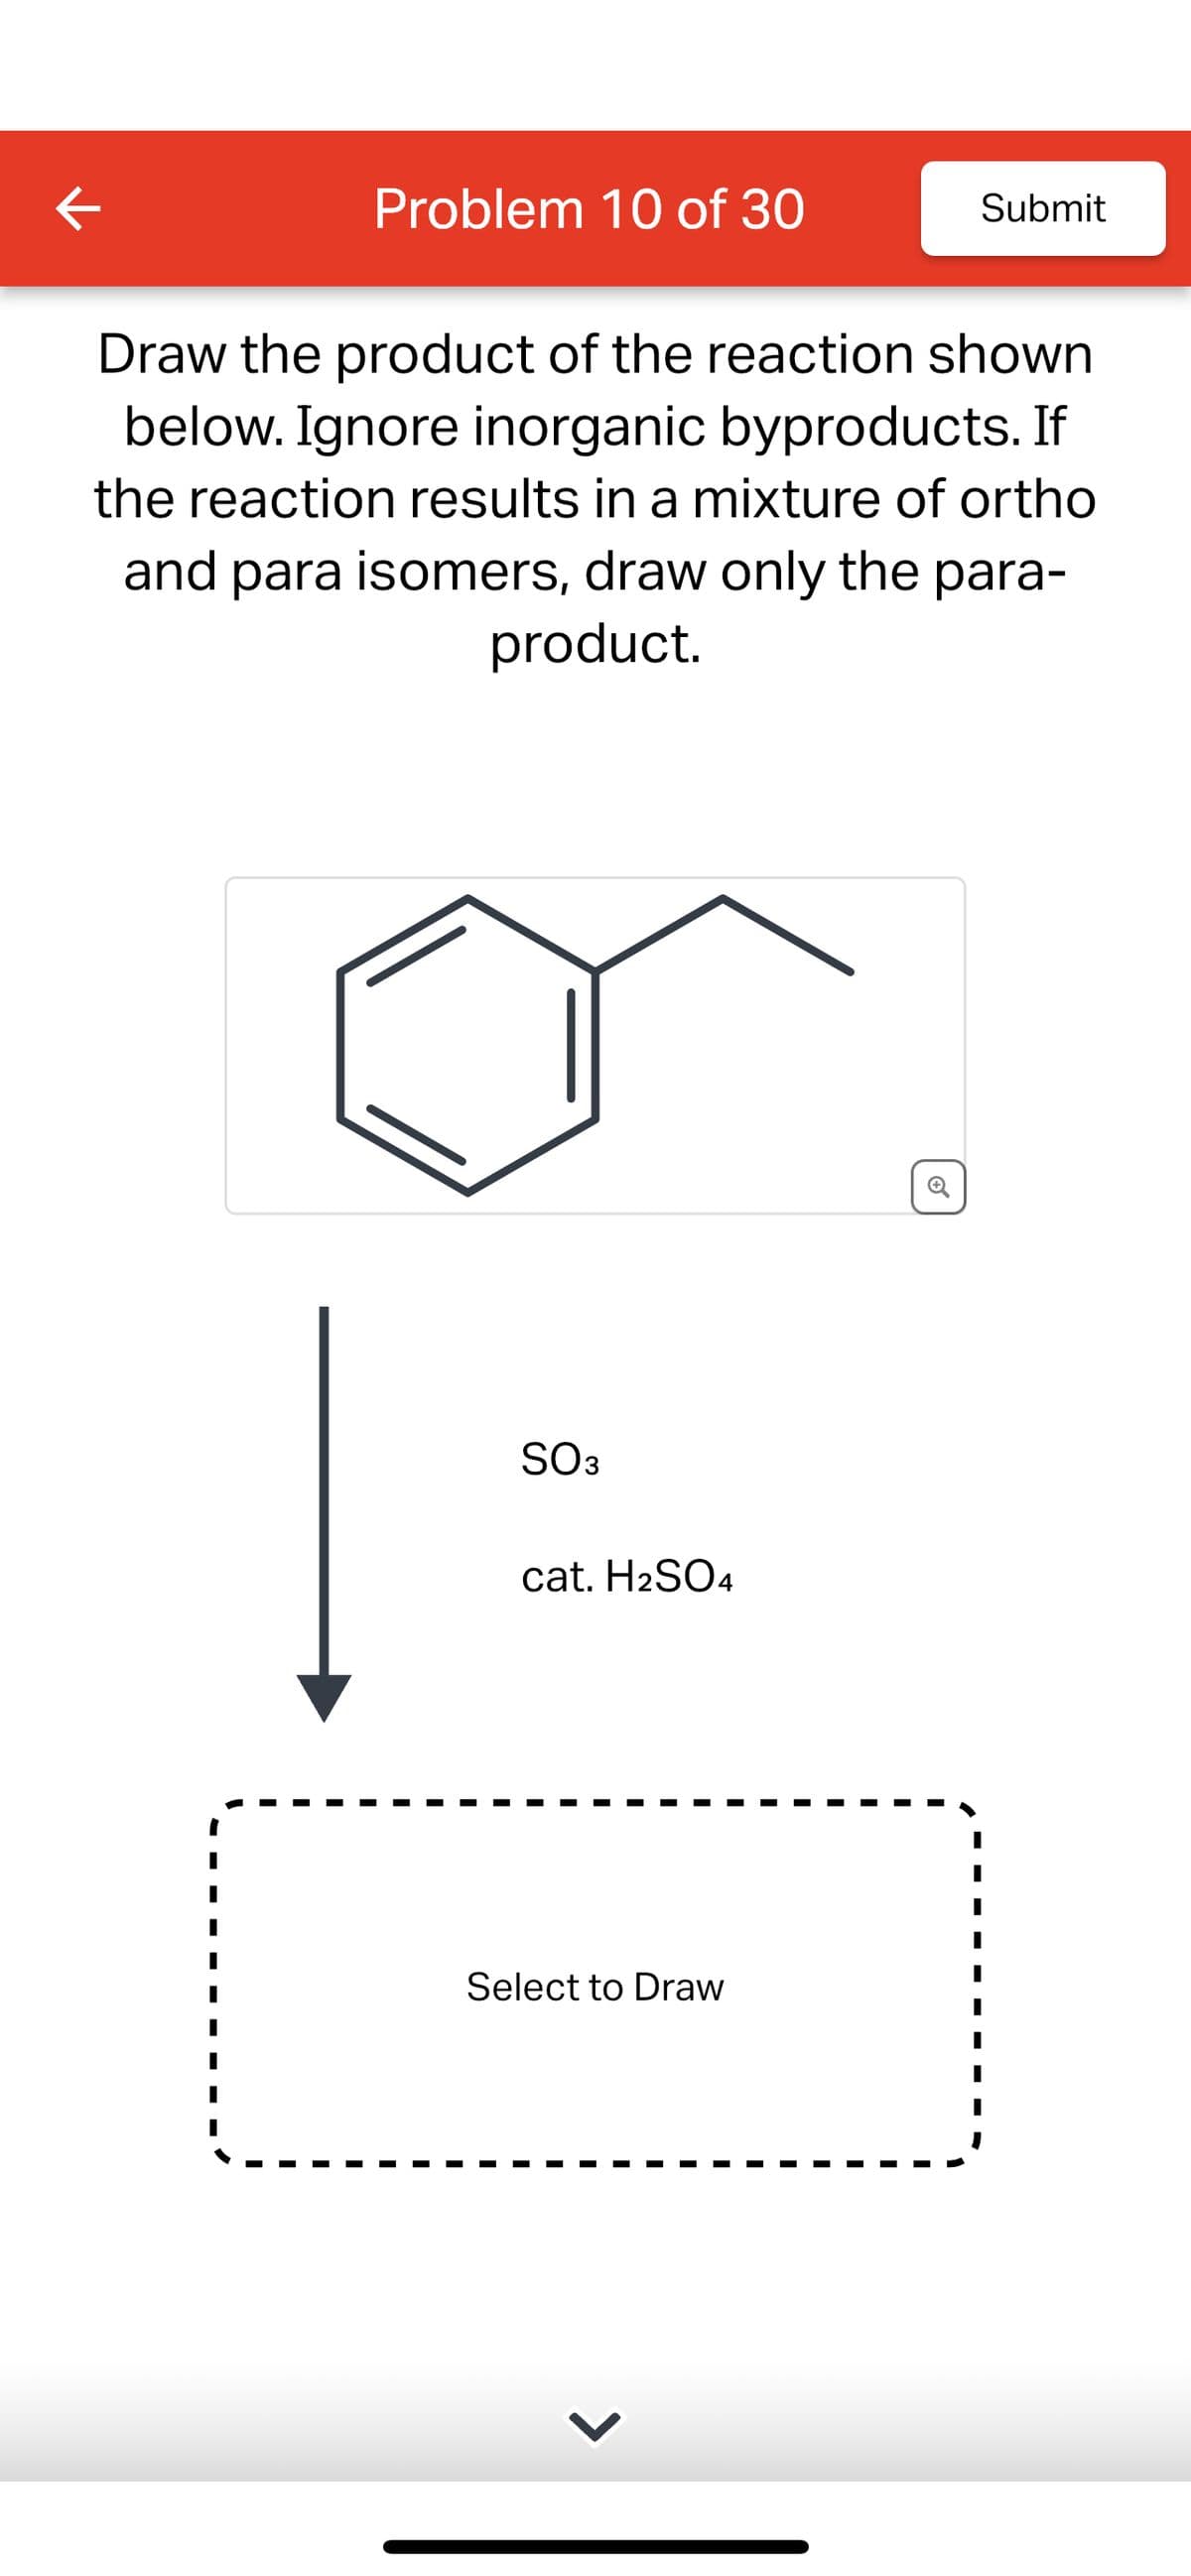 K
Problem 10 of 30
Submit
Draw the product of the reaction shown
below. Ignore inorganic byproducts. If
the reaction results in a mixture of ortho
and para isomers, draw only the para-
product.
SO3
cat. H2SO4
Select to Draw
ම